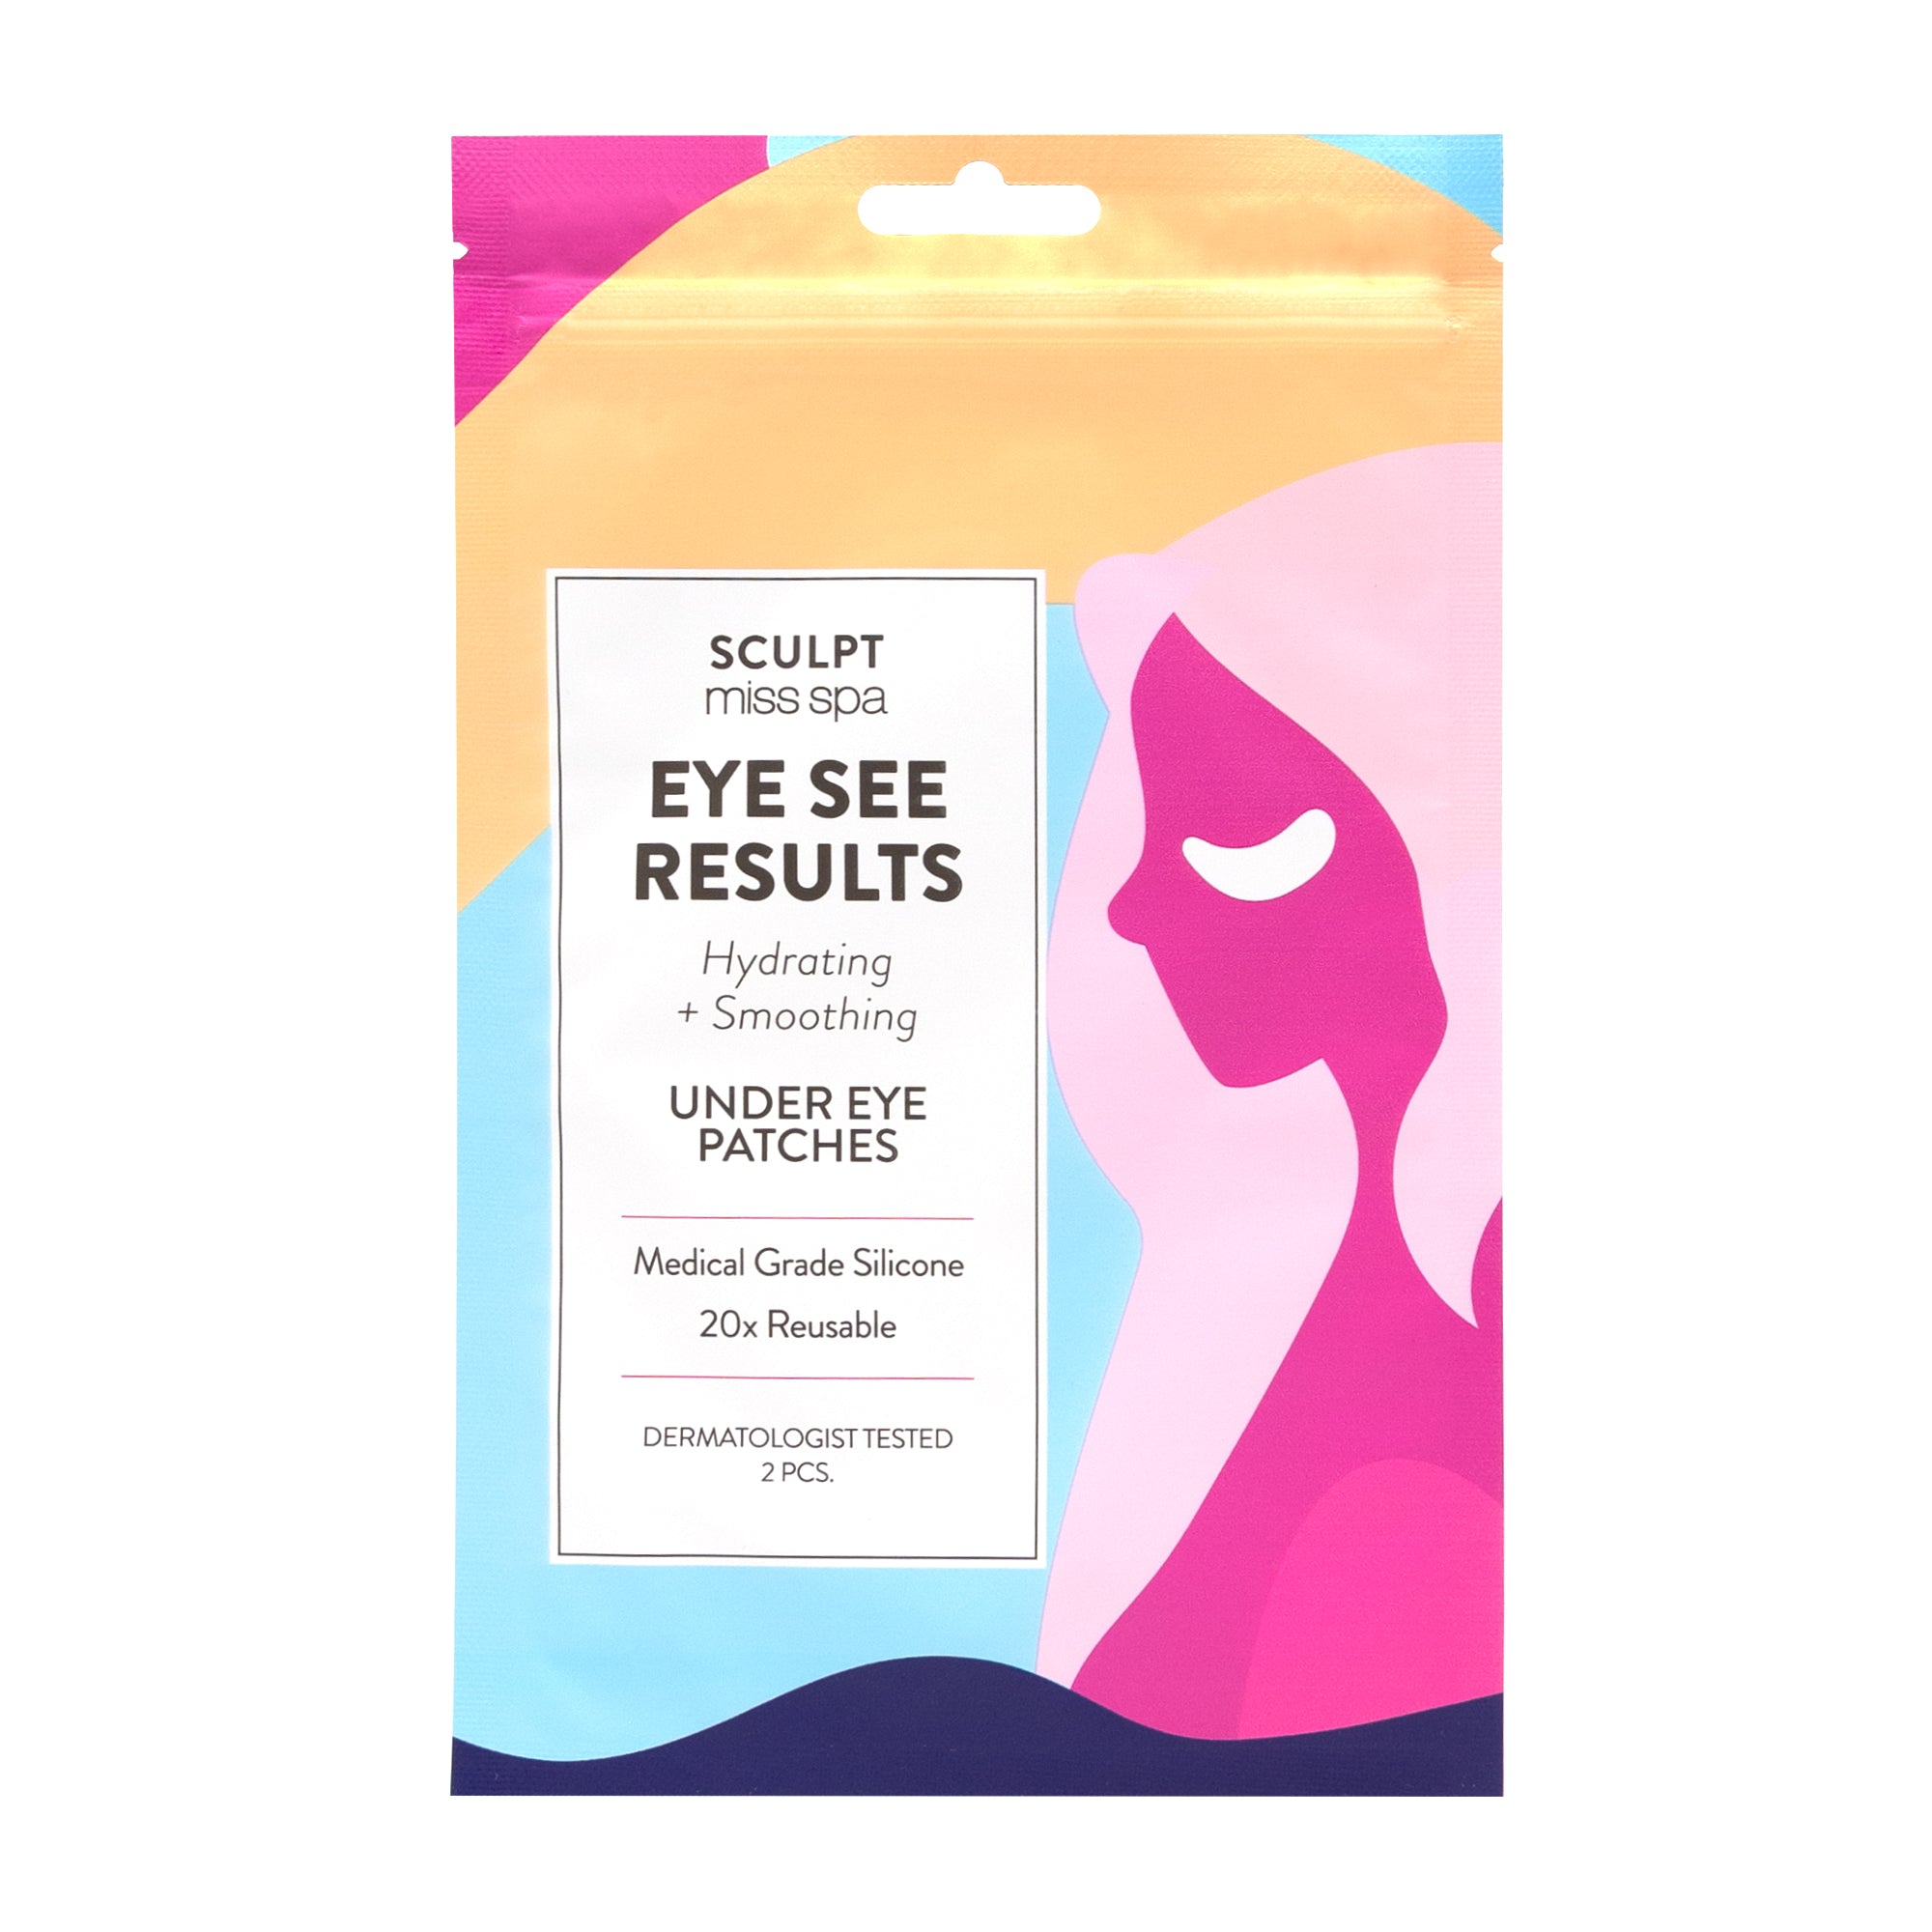 Hydrating + Smoothing Under Eye Patches